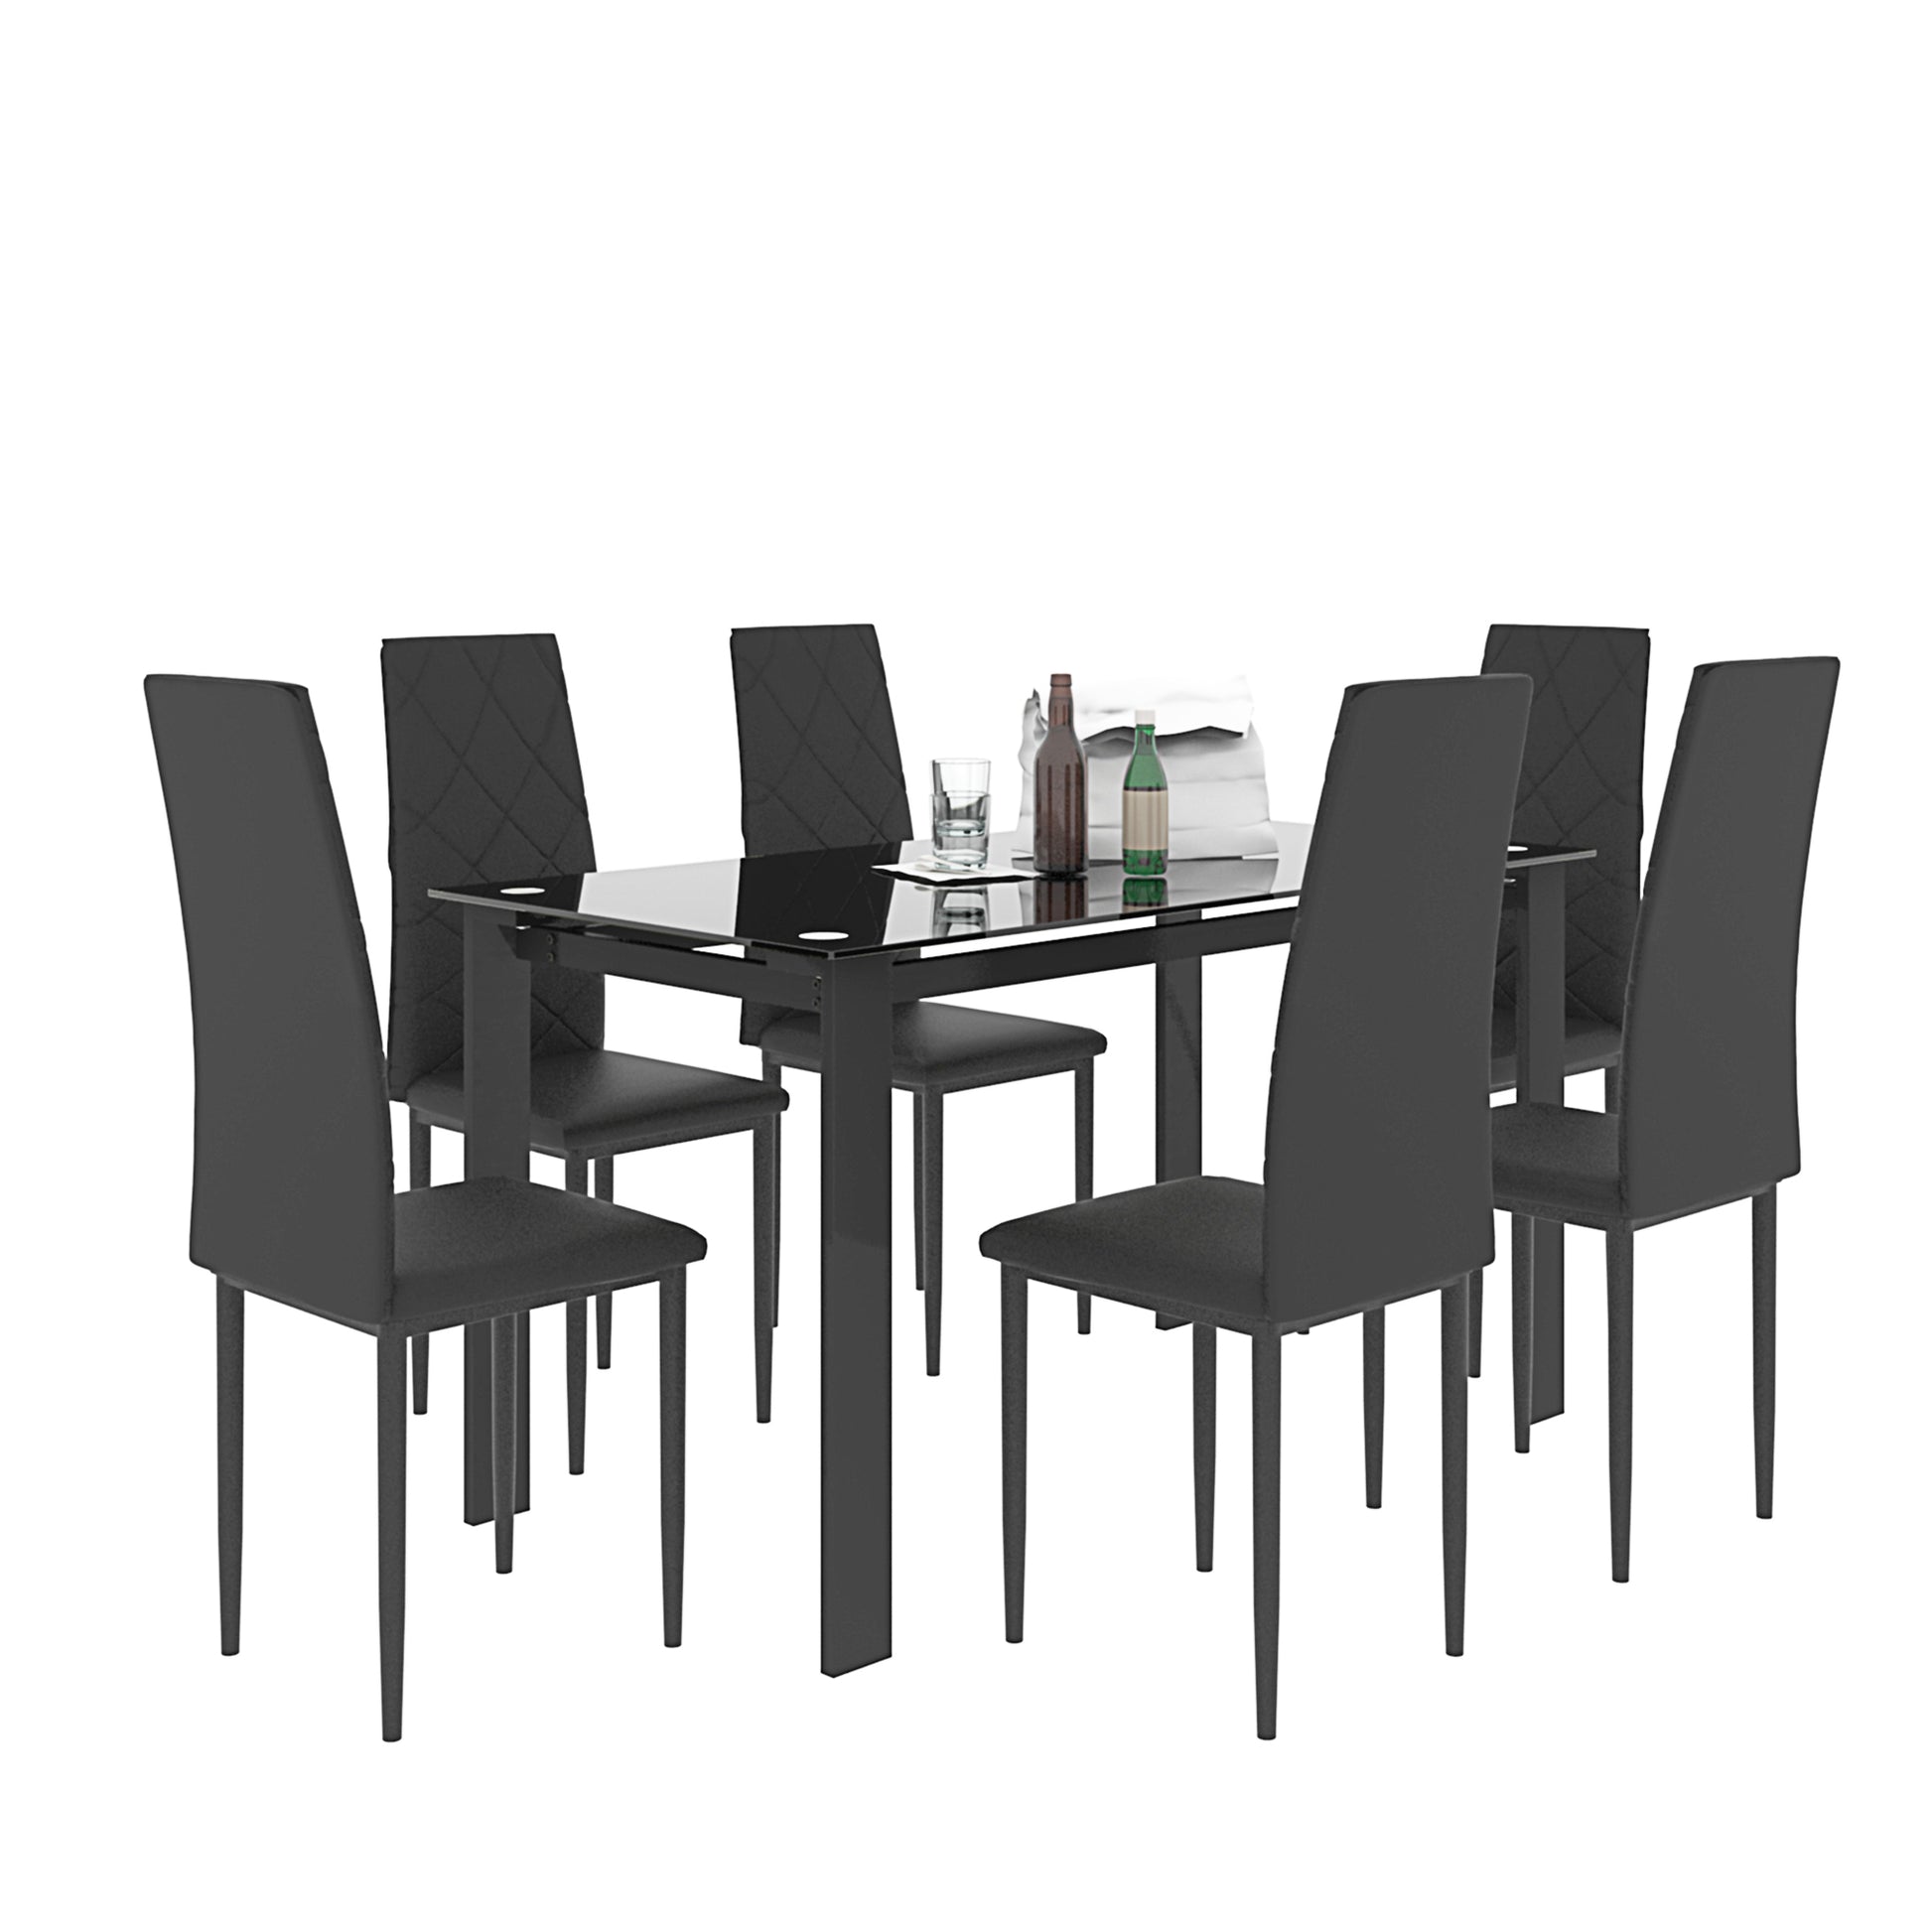 7-piece dining table set, dining table and chair - Enova Luxe Home Store